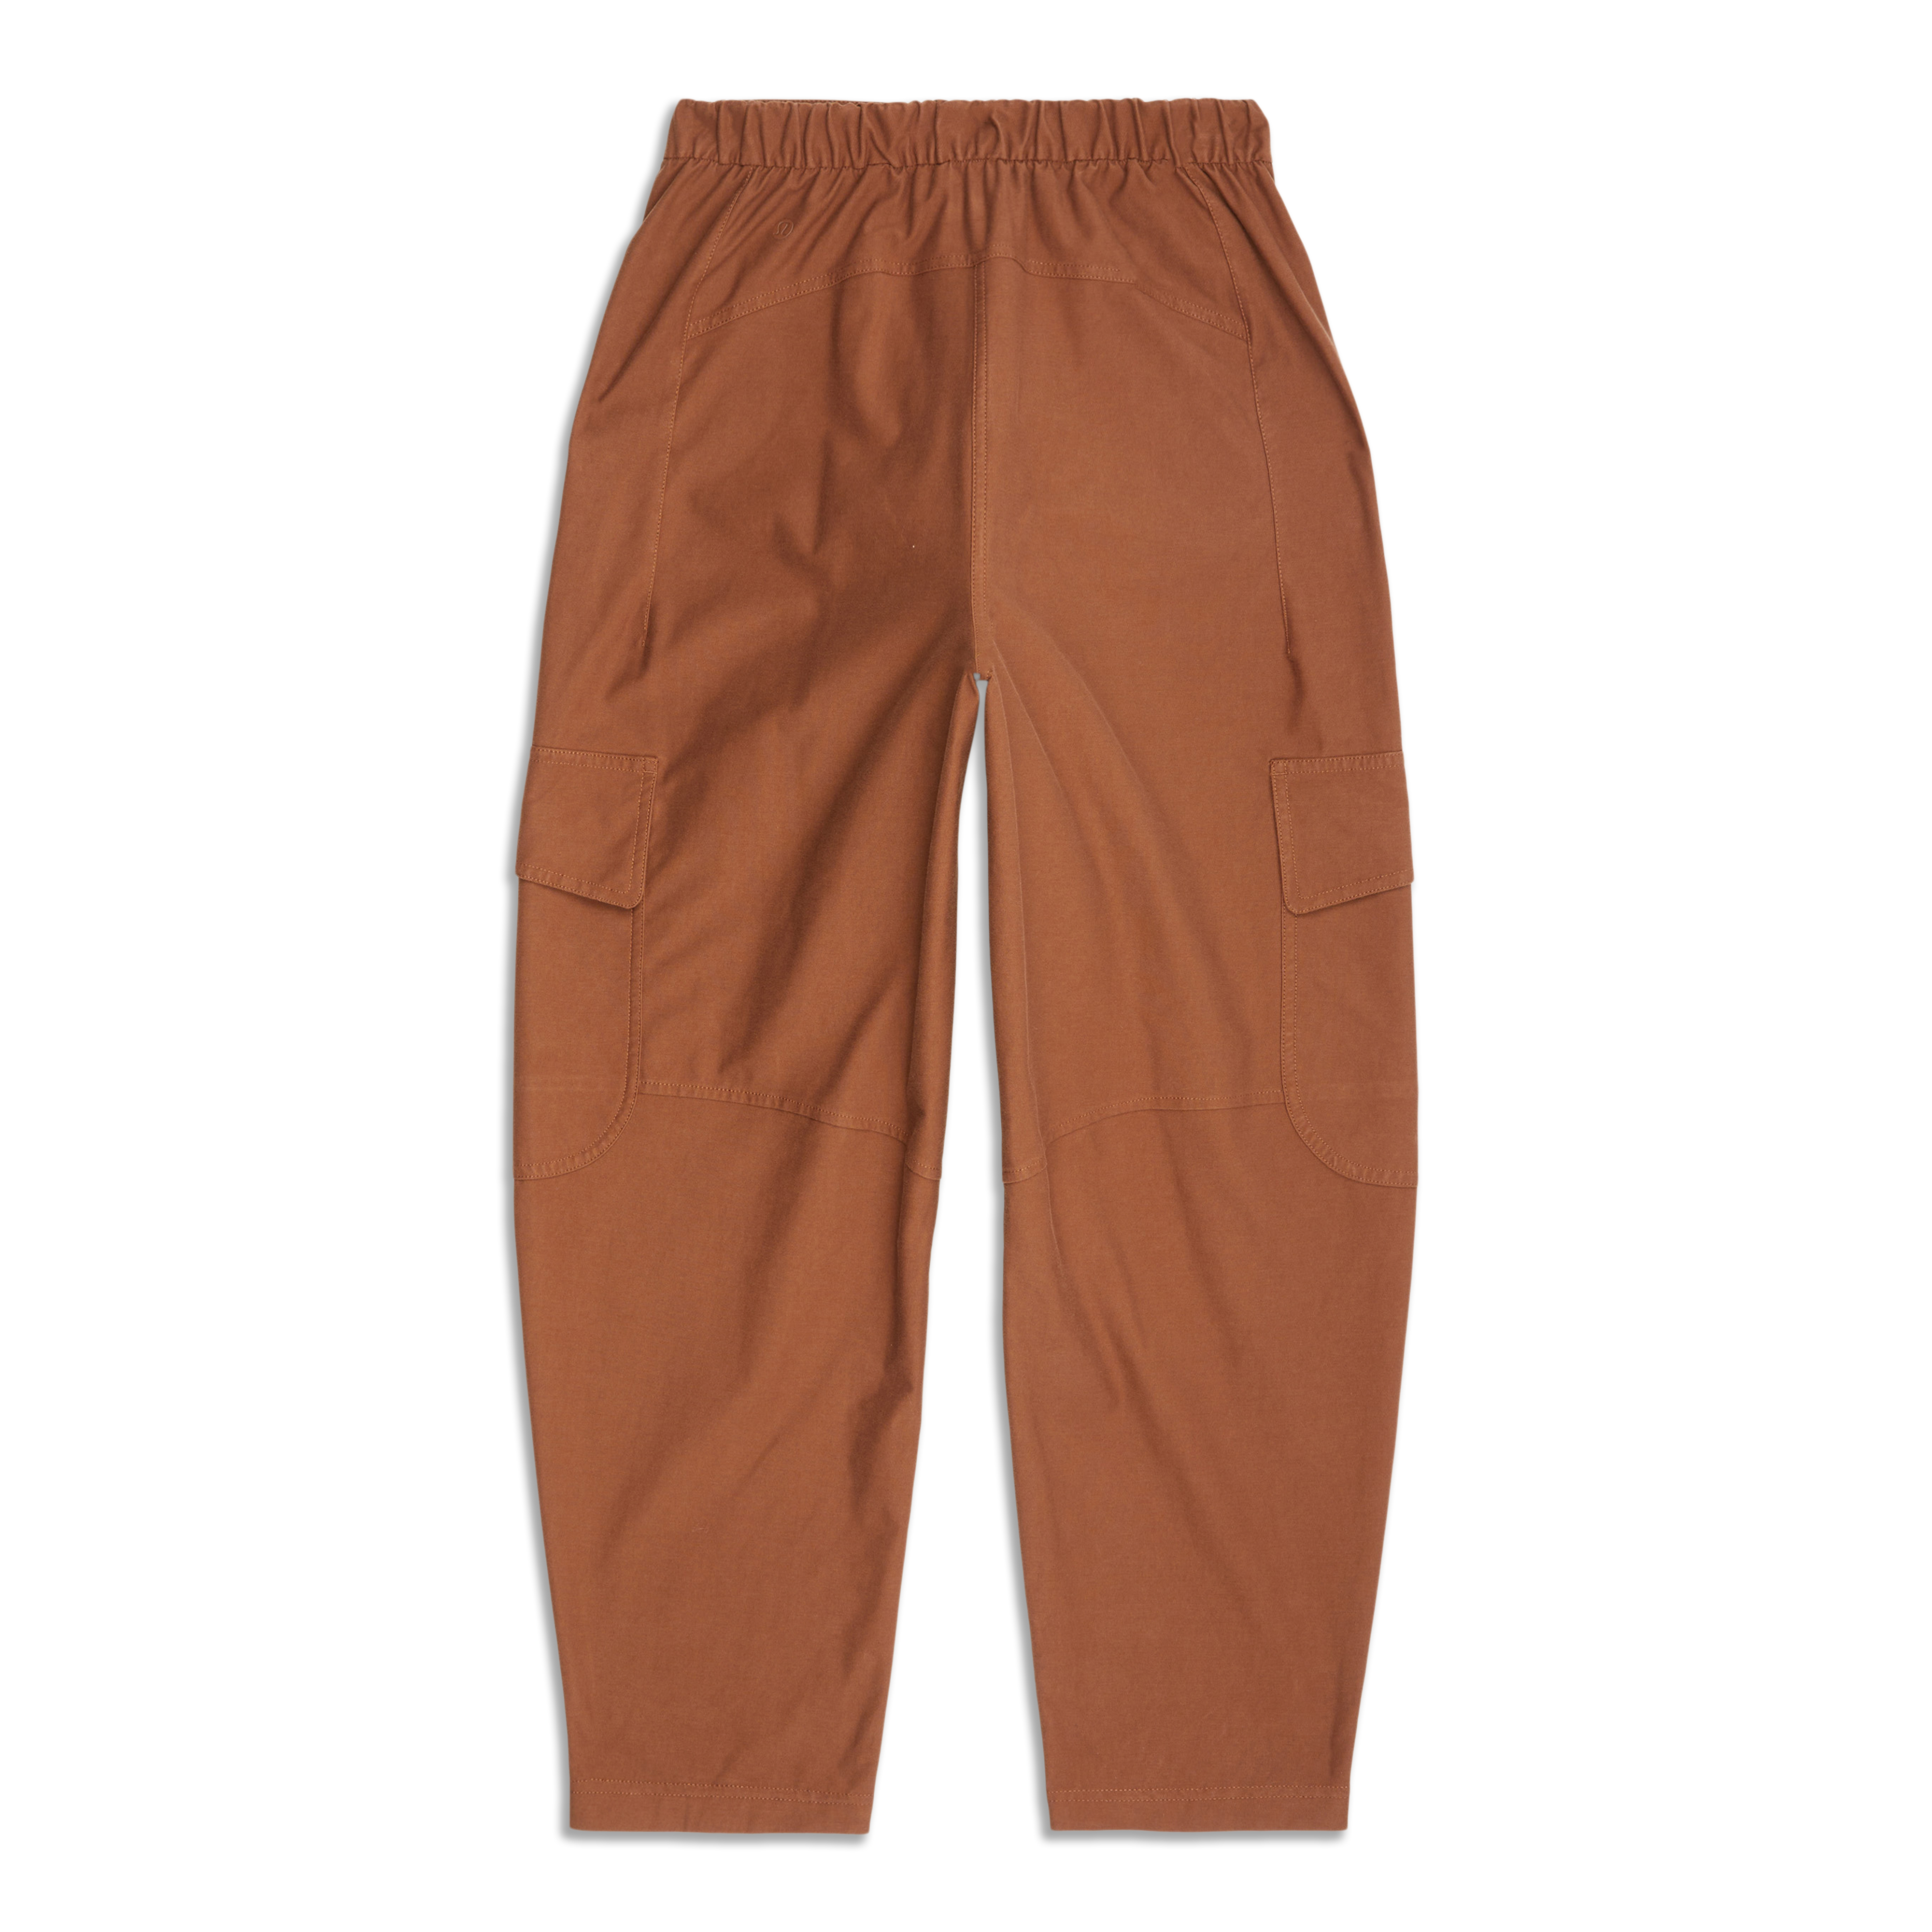 the new city sleek 5 pocket wide leg high rise pants in roasted